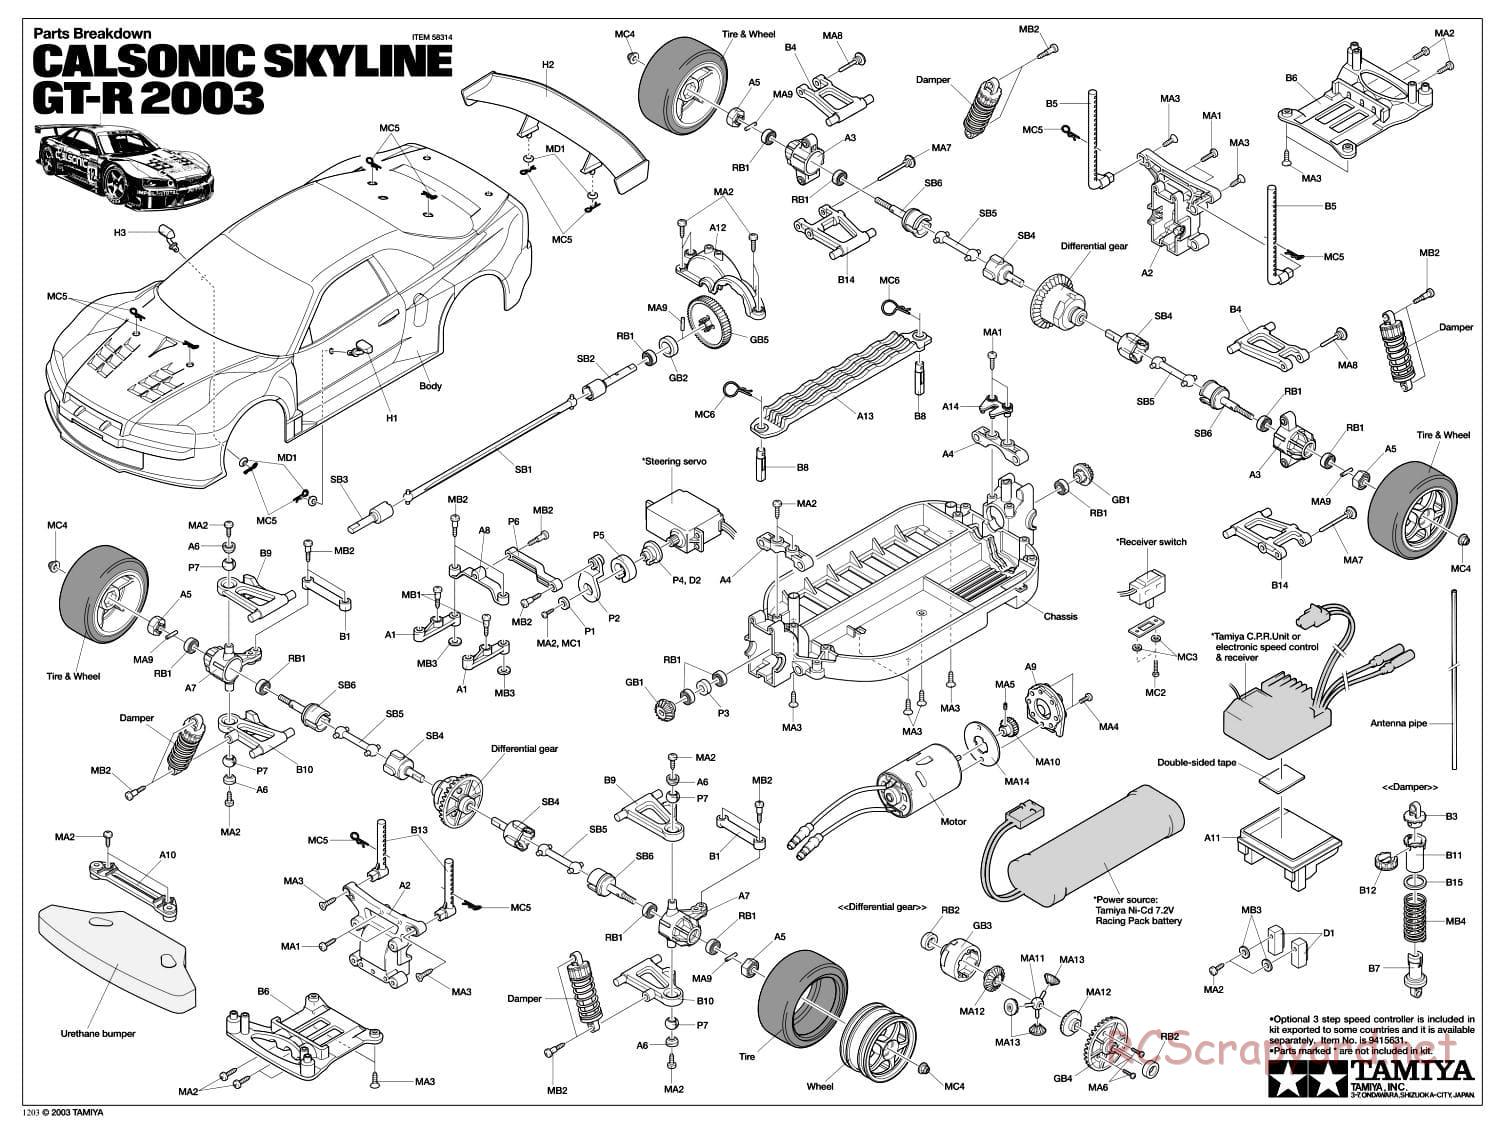 Tamiya - Calsonic Skyline GT-R 2003 - TT-01 Chassis - Exploded View